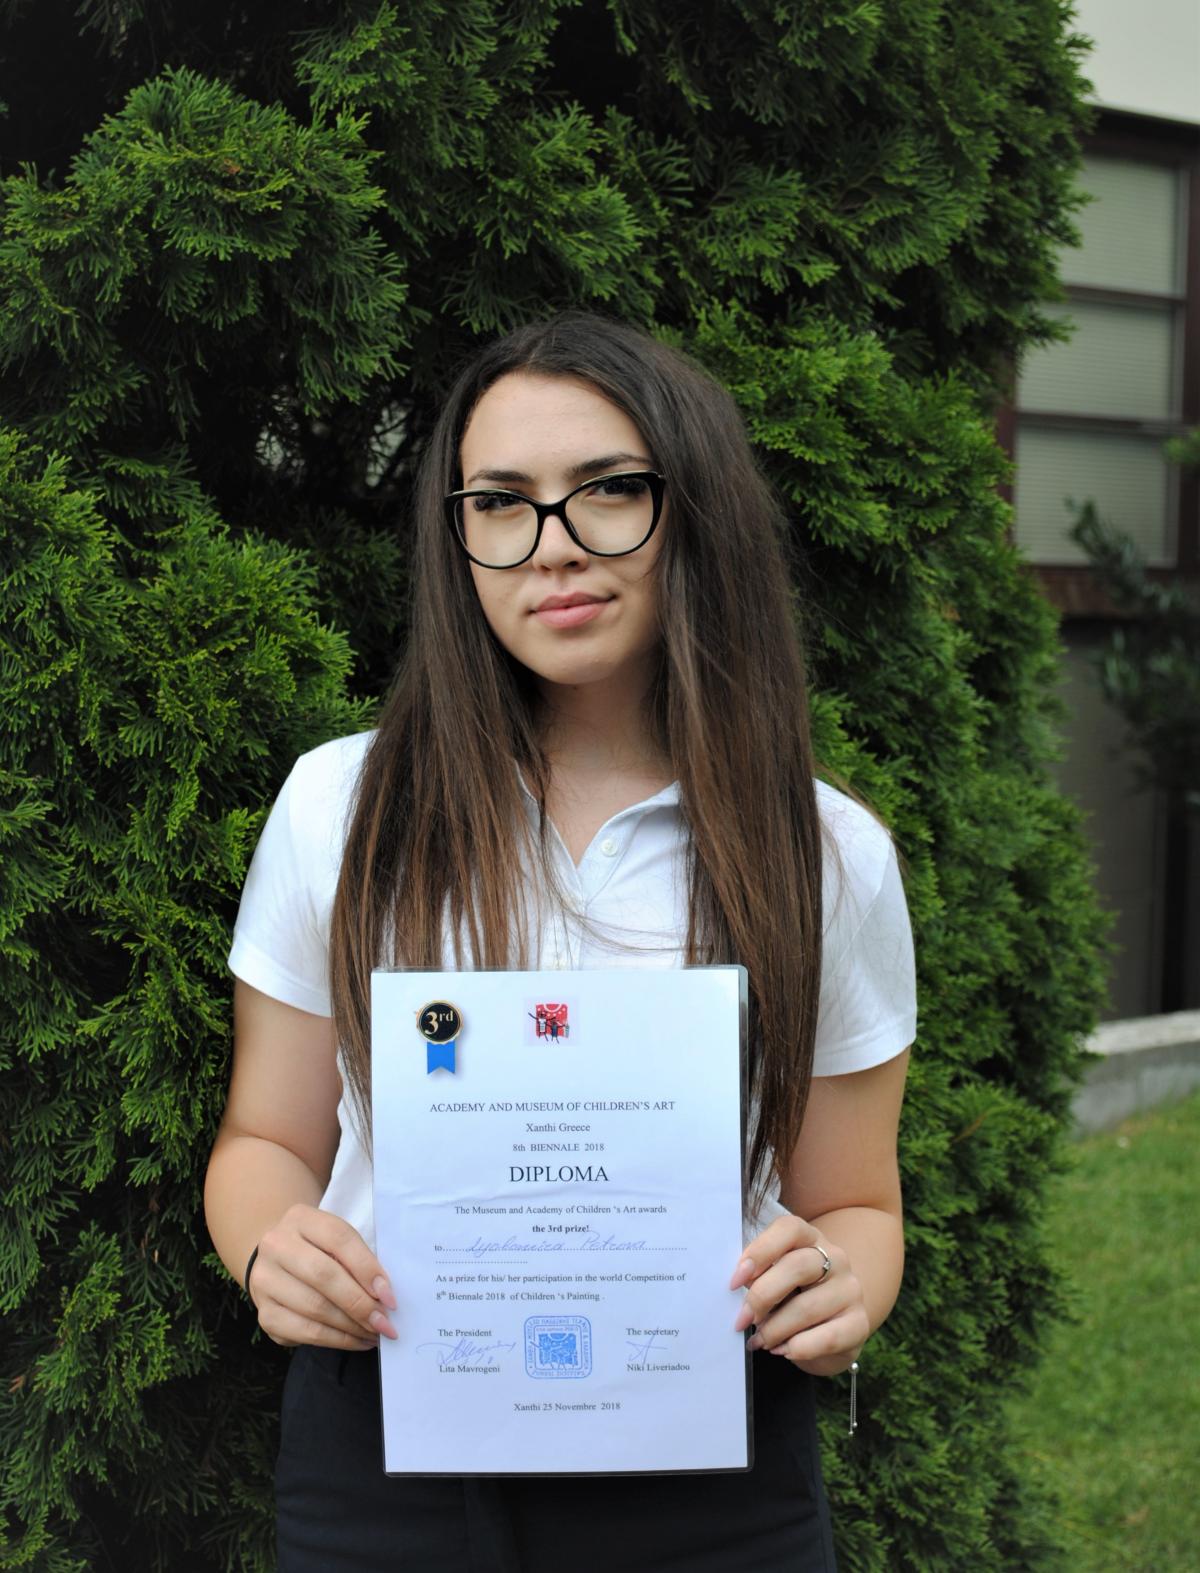 Lubomira Petrova took part in an international competition